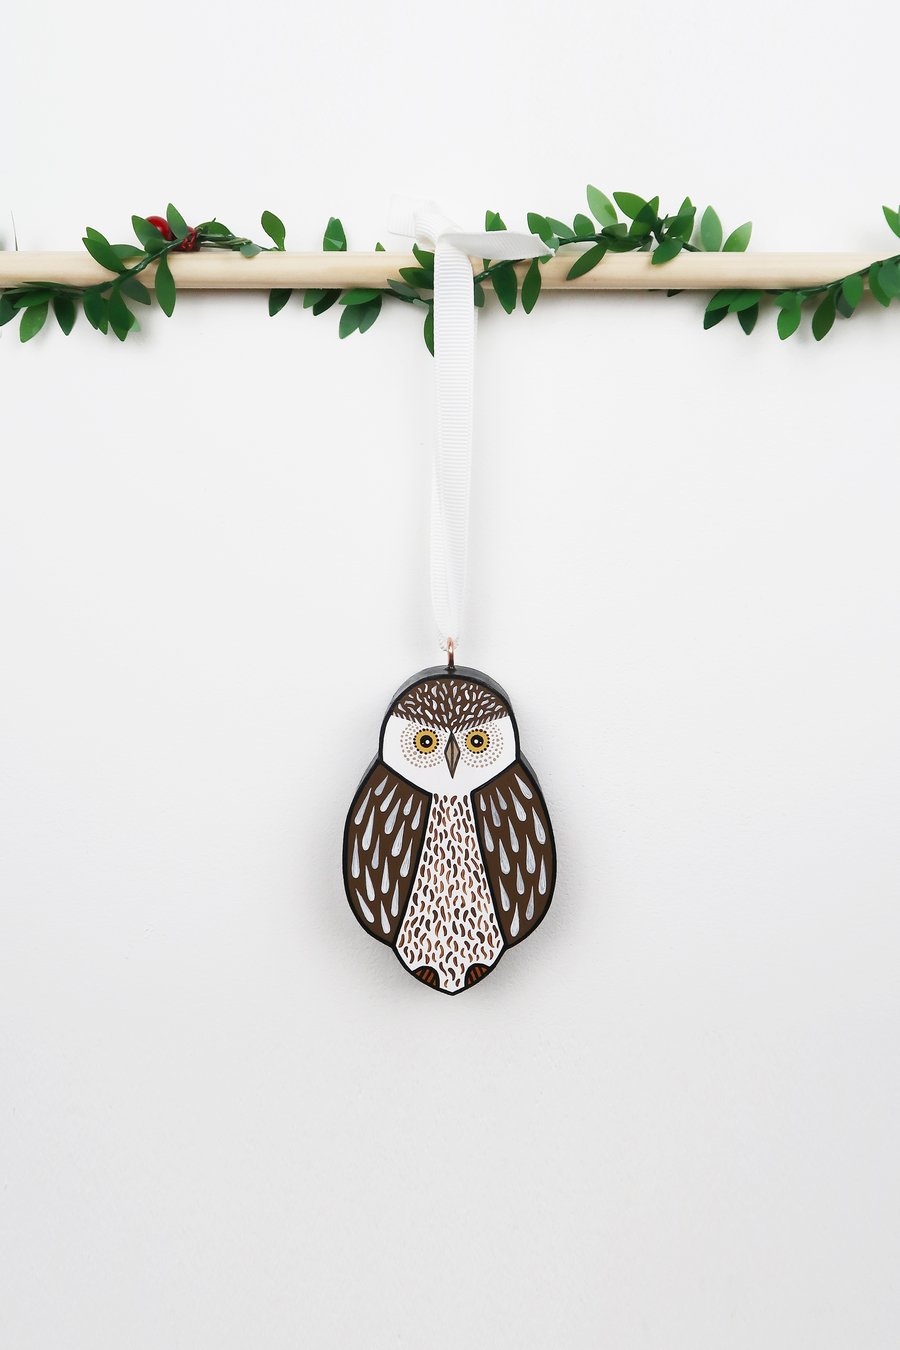 Little owl hanging Christmas tree ornament, cute stocking filler